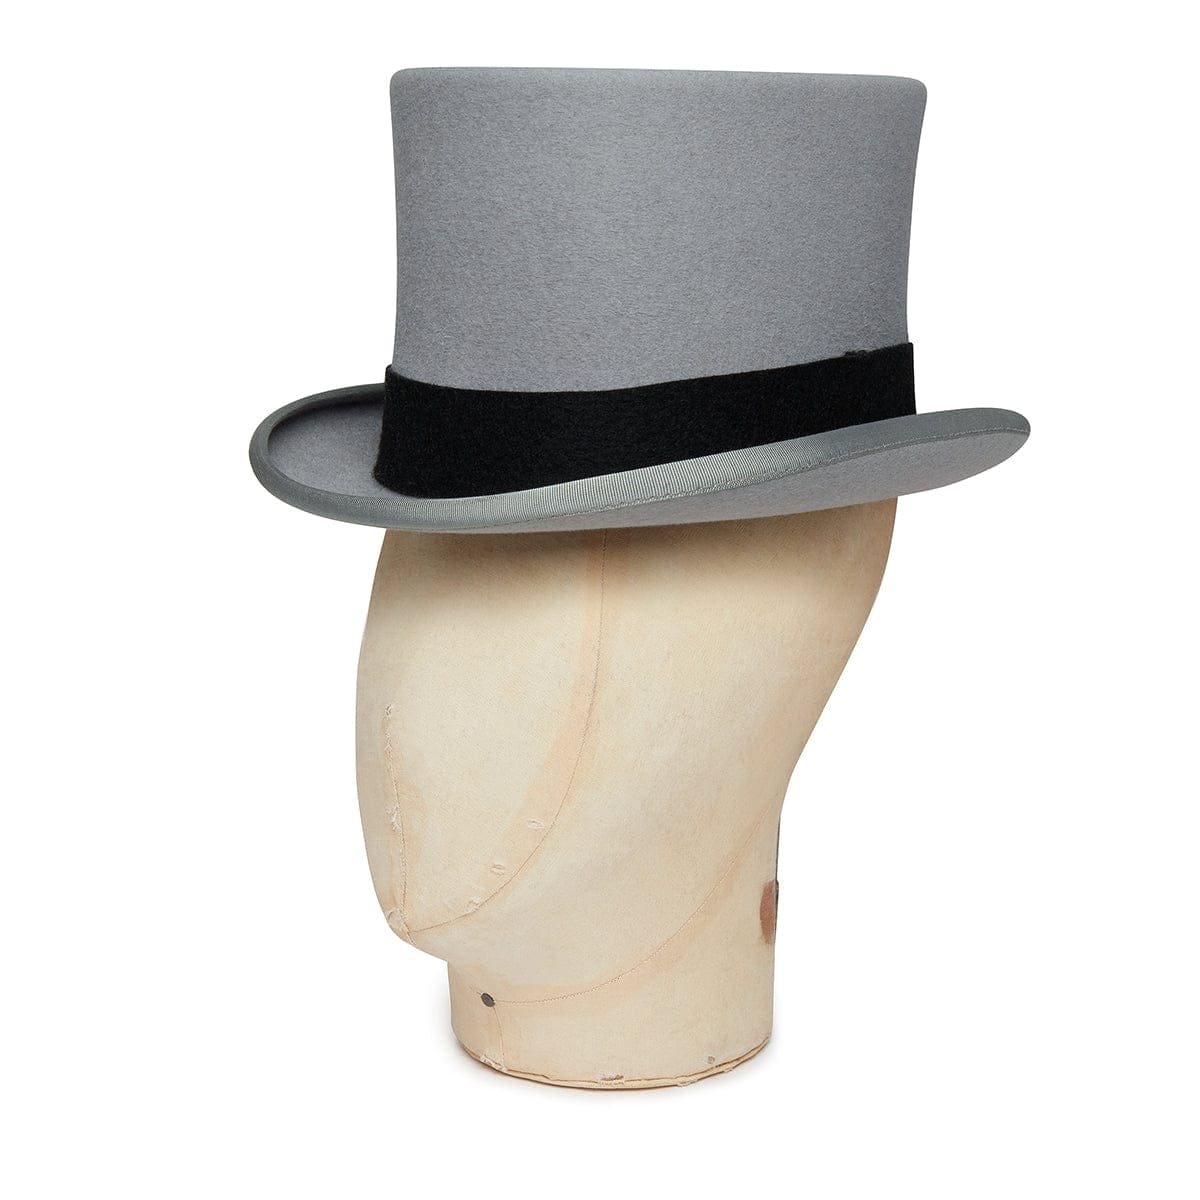 Cream Tall Top Hat – Bates Hatters of London